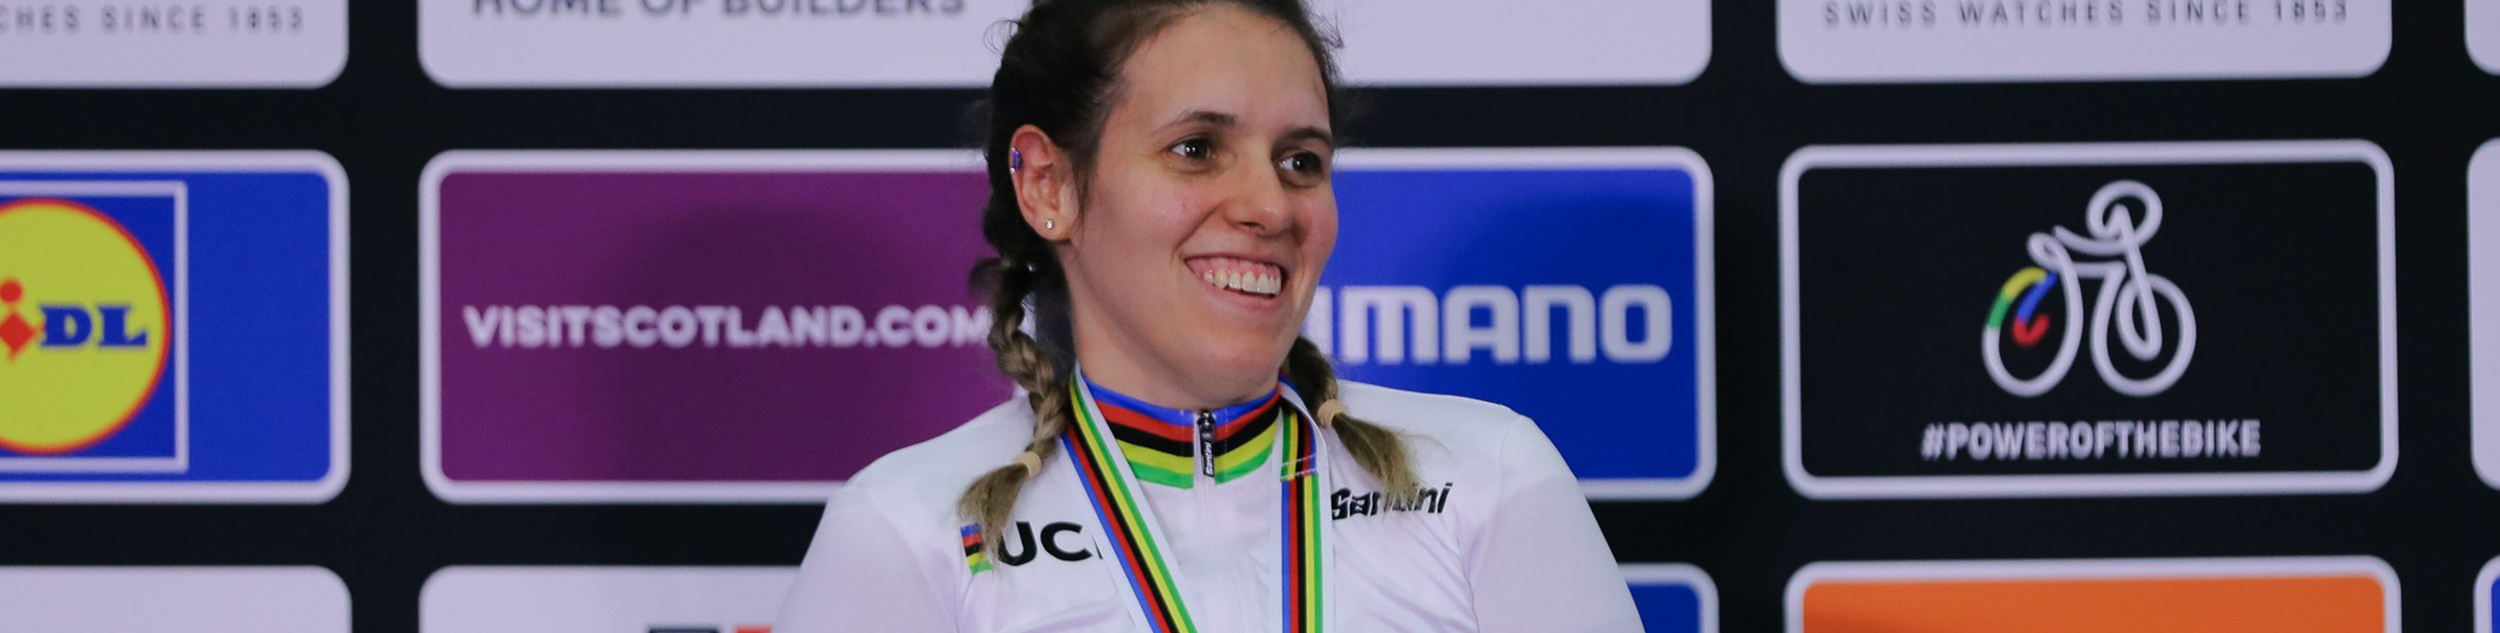 Amanda Reid smiling with a medal around her neck